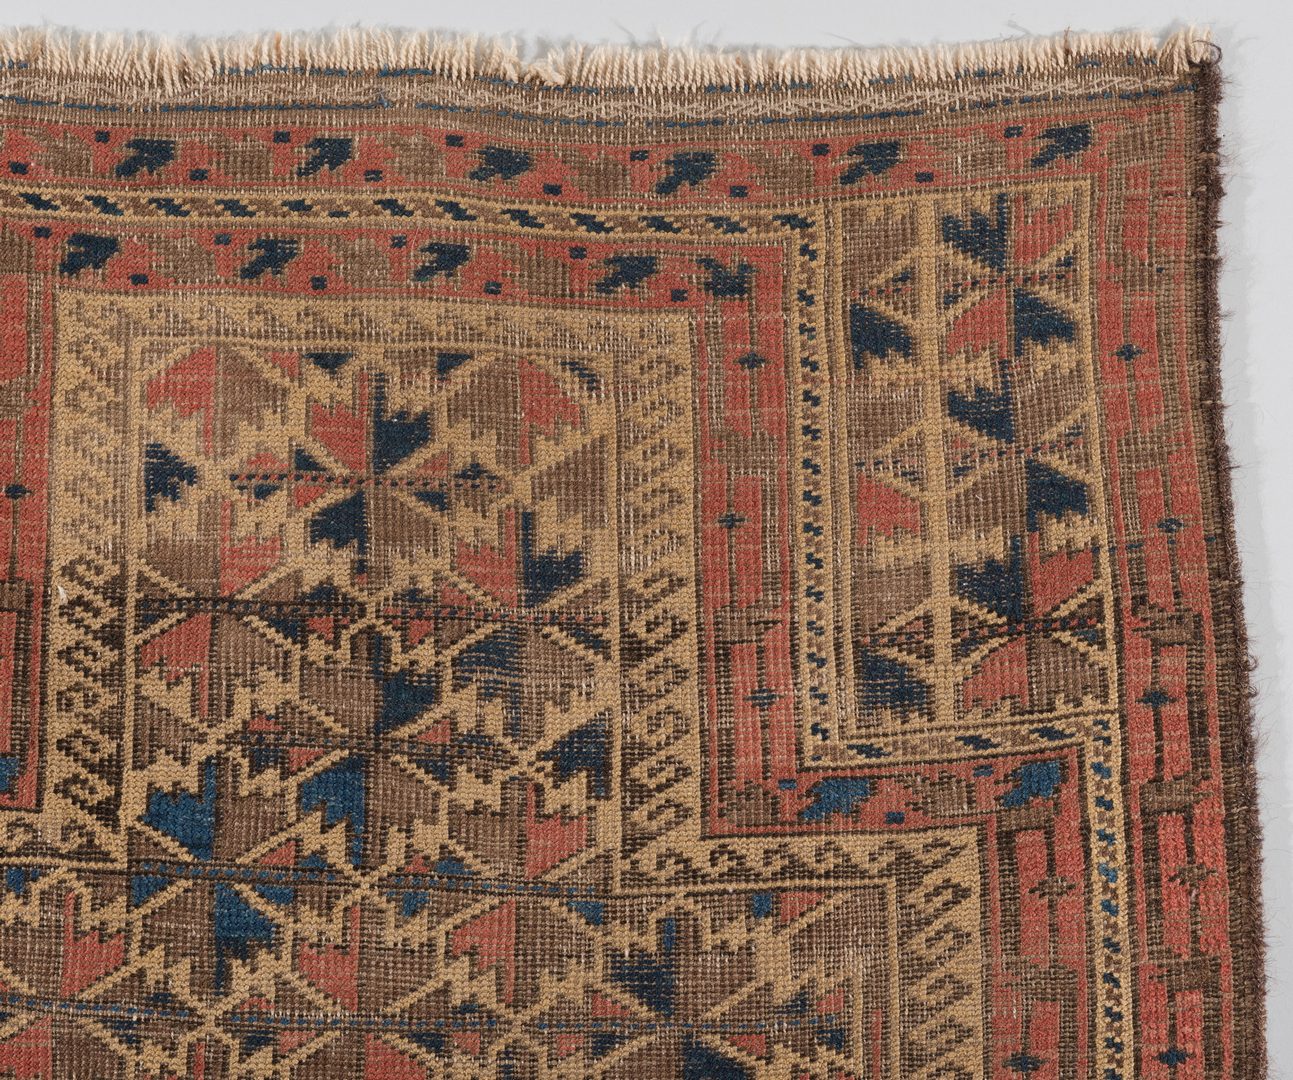 Lot 306: Serabend and Belouchi Area Rugs